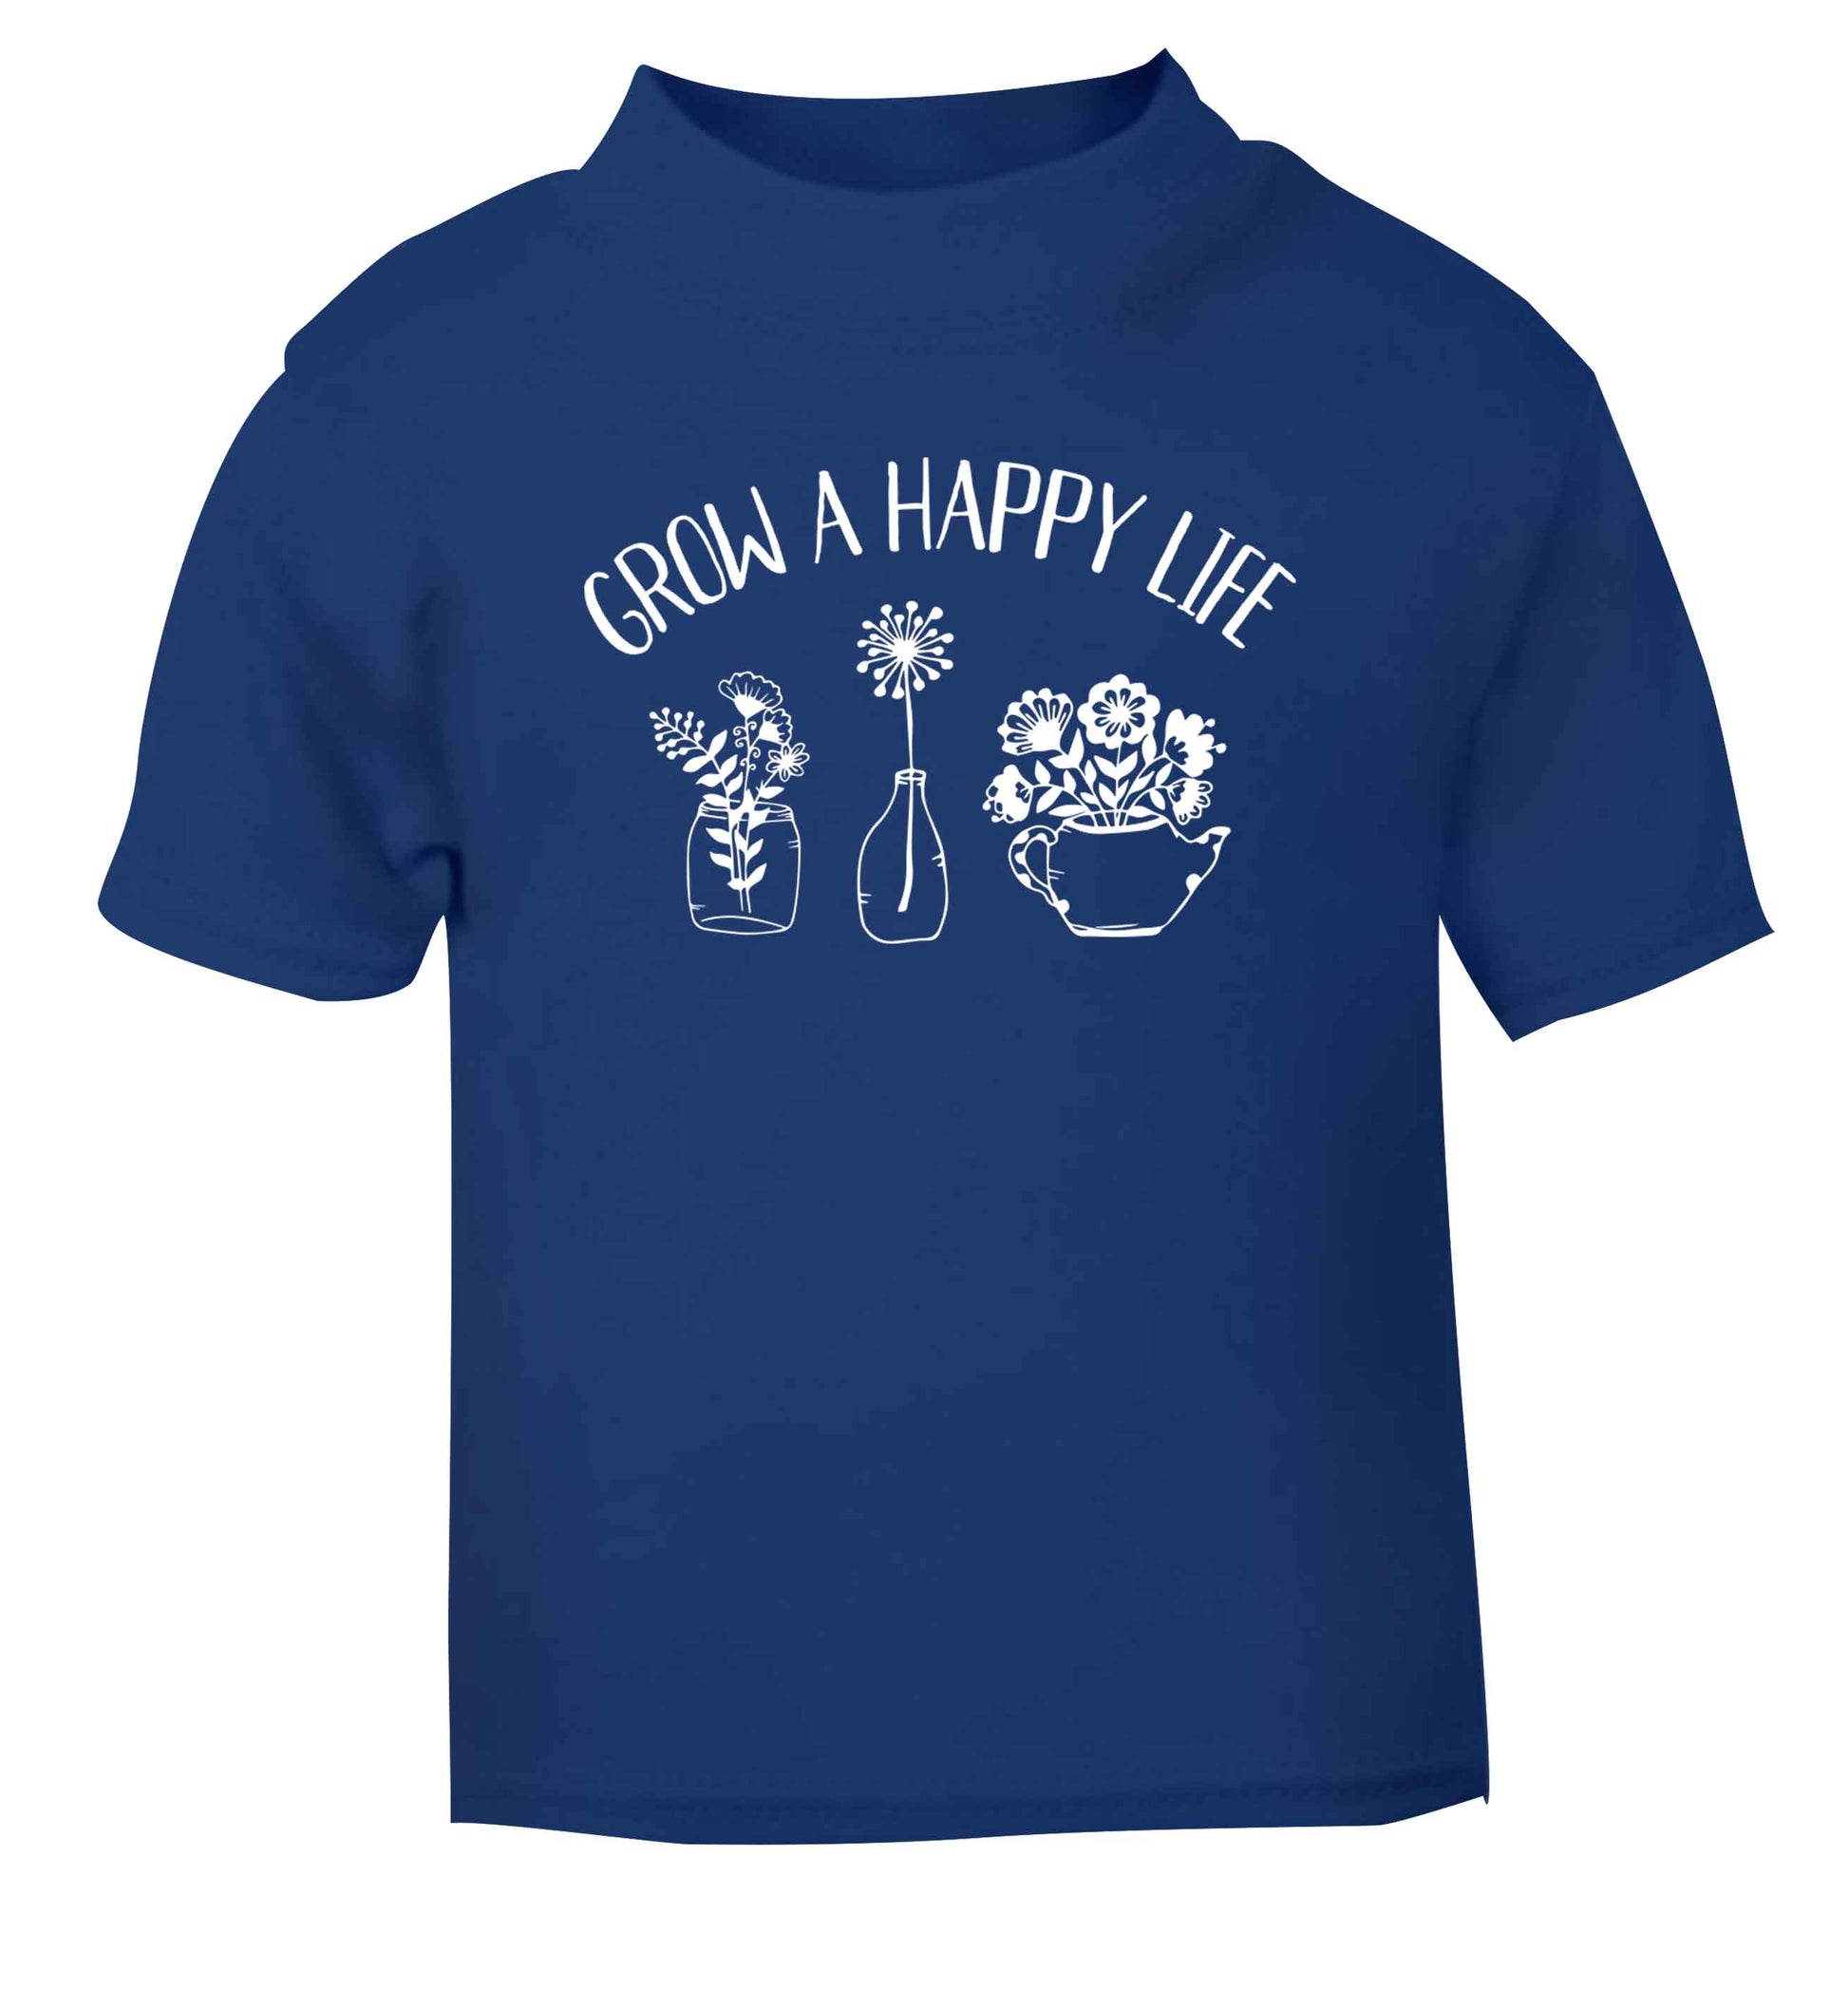 Grow a happy life blue Baby Toddler Tshirt 2 Years